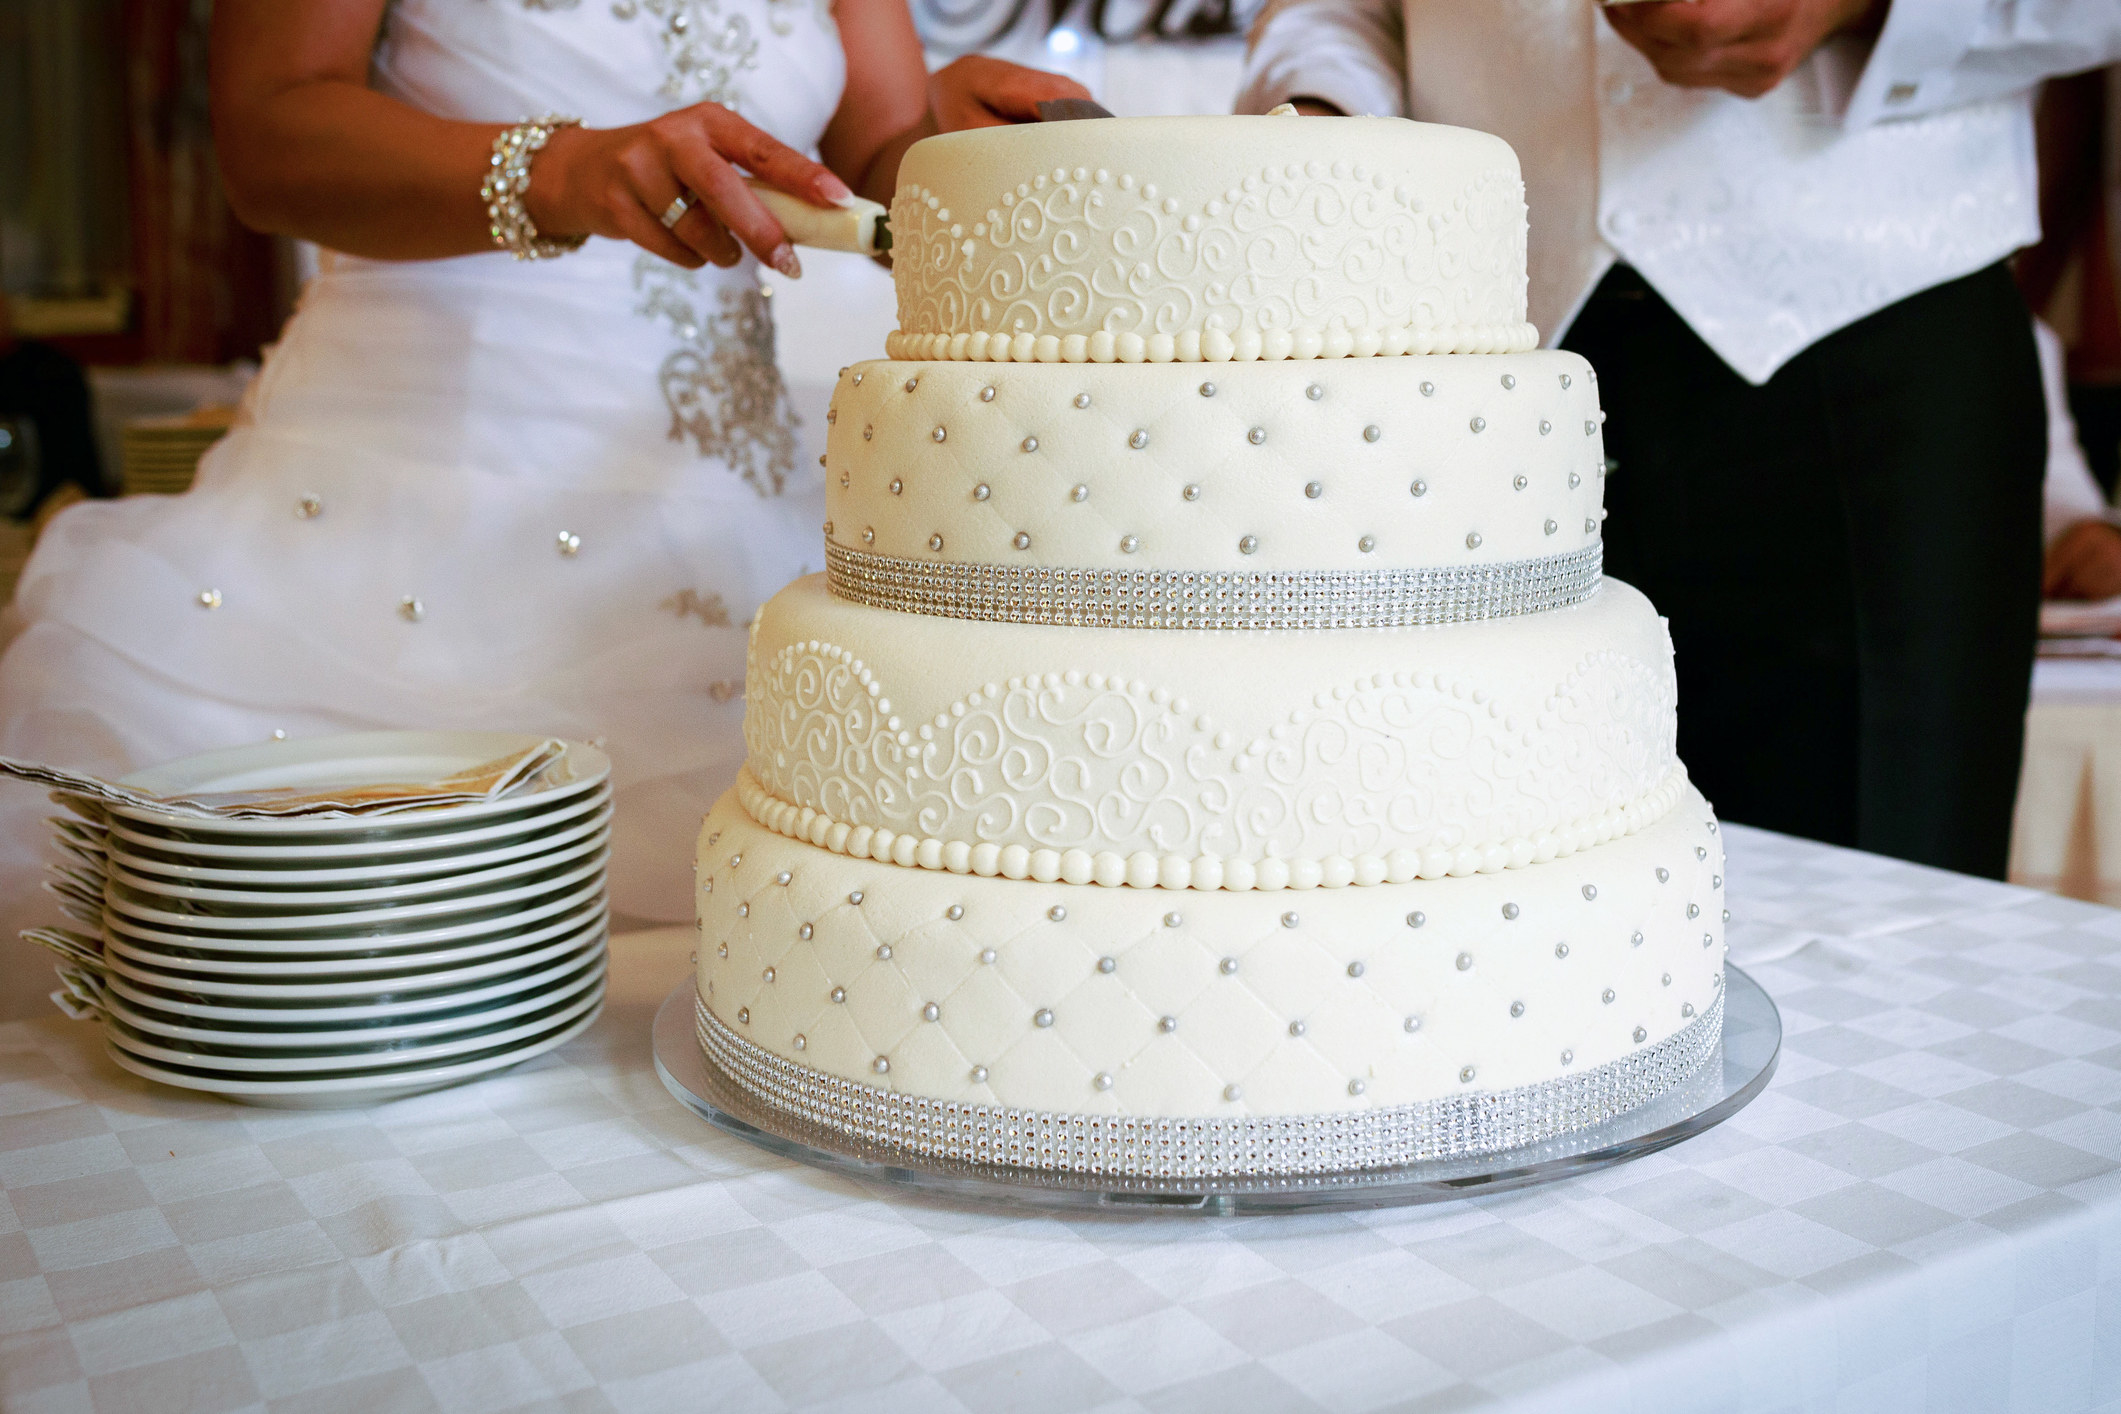 Bride and groom cutting a tiered wedding cake